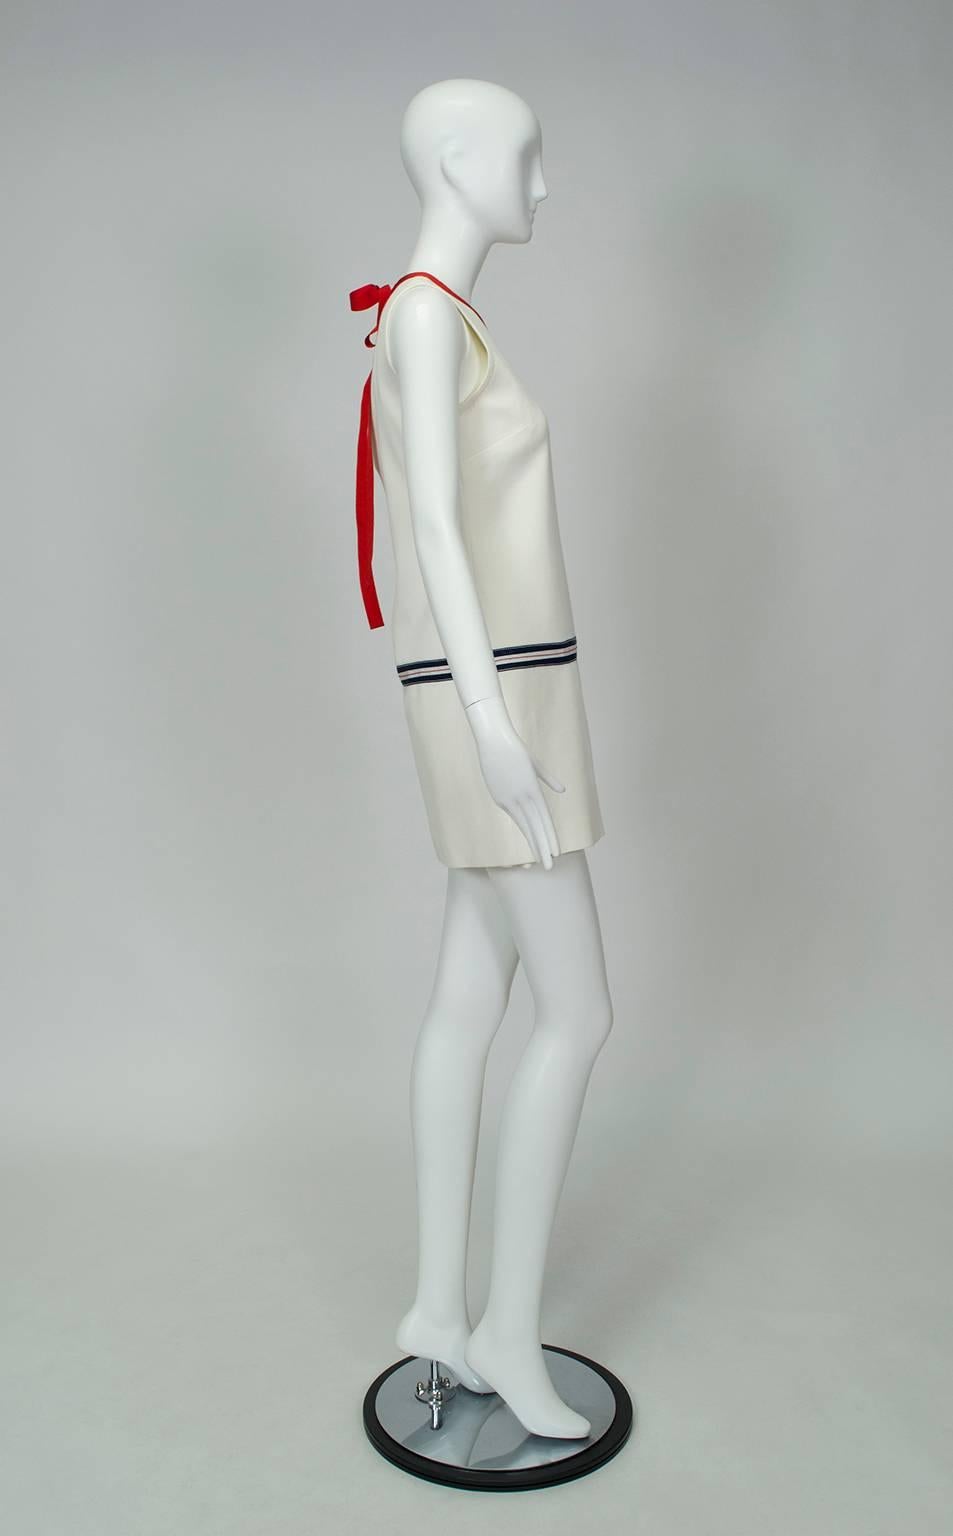 Reminiscent of the A-line mini dresses of the Mod Era, this frock is perfectly suited for showing off a great pair of legs (or white go-go boots, if you dare!). Its minimalist design and red, white and blue ribbon waist trim will carry you from